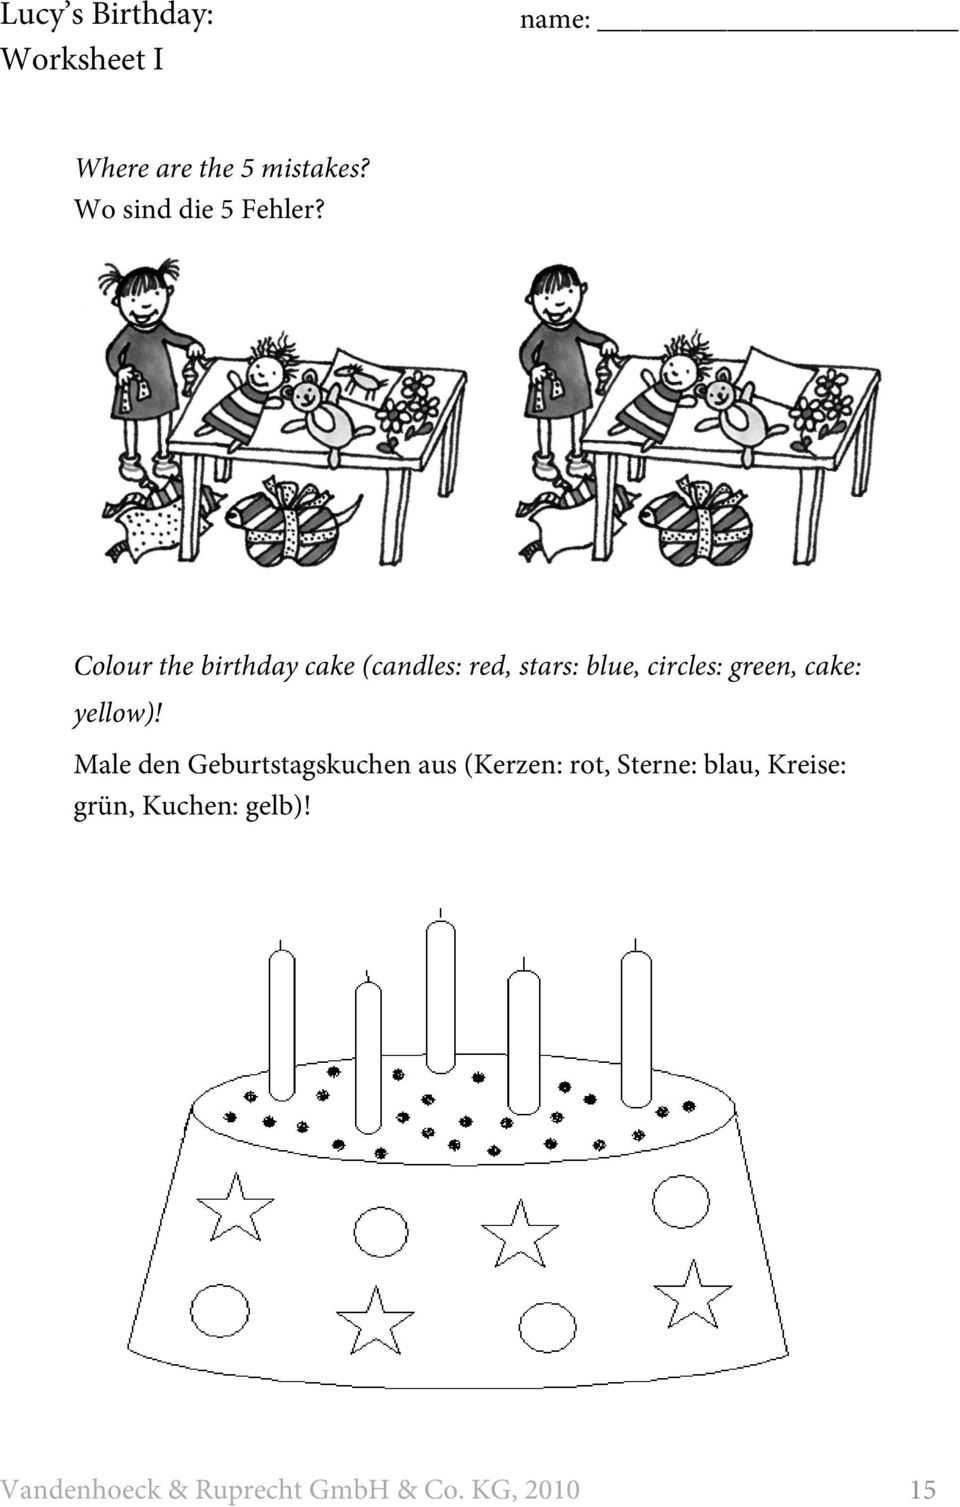 Colour the birthday cake (candles: red, stars: blue, circles: green, cake: